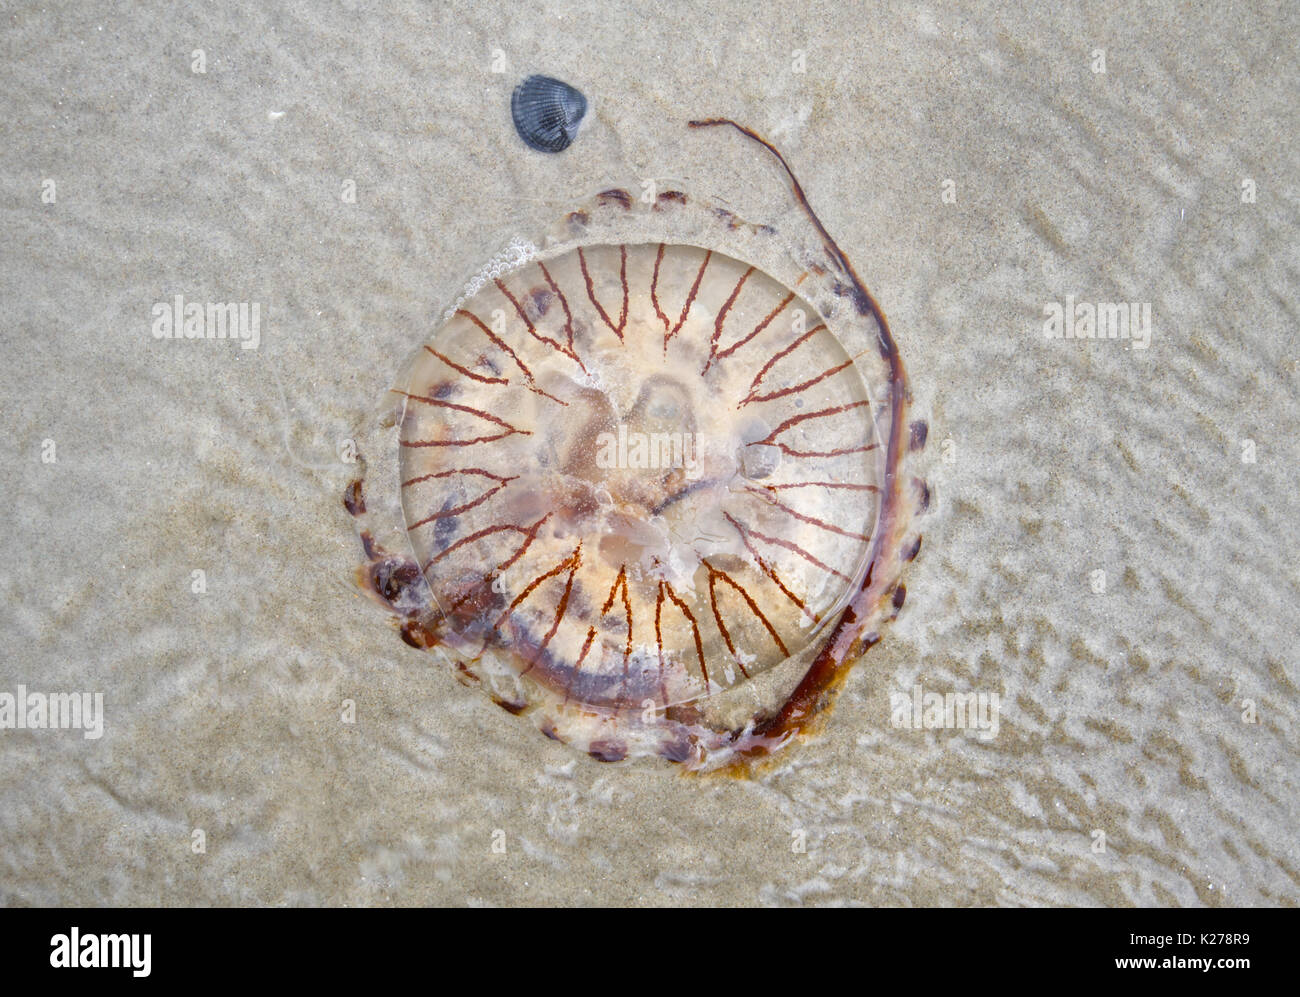 Compass jellyfish washed up the beach Stock Photo